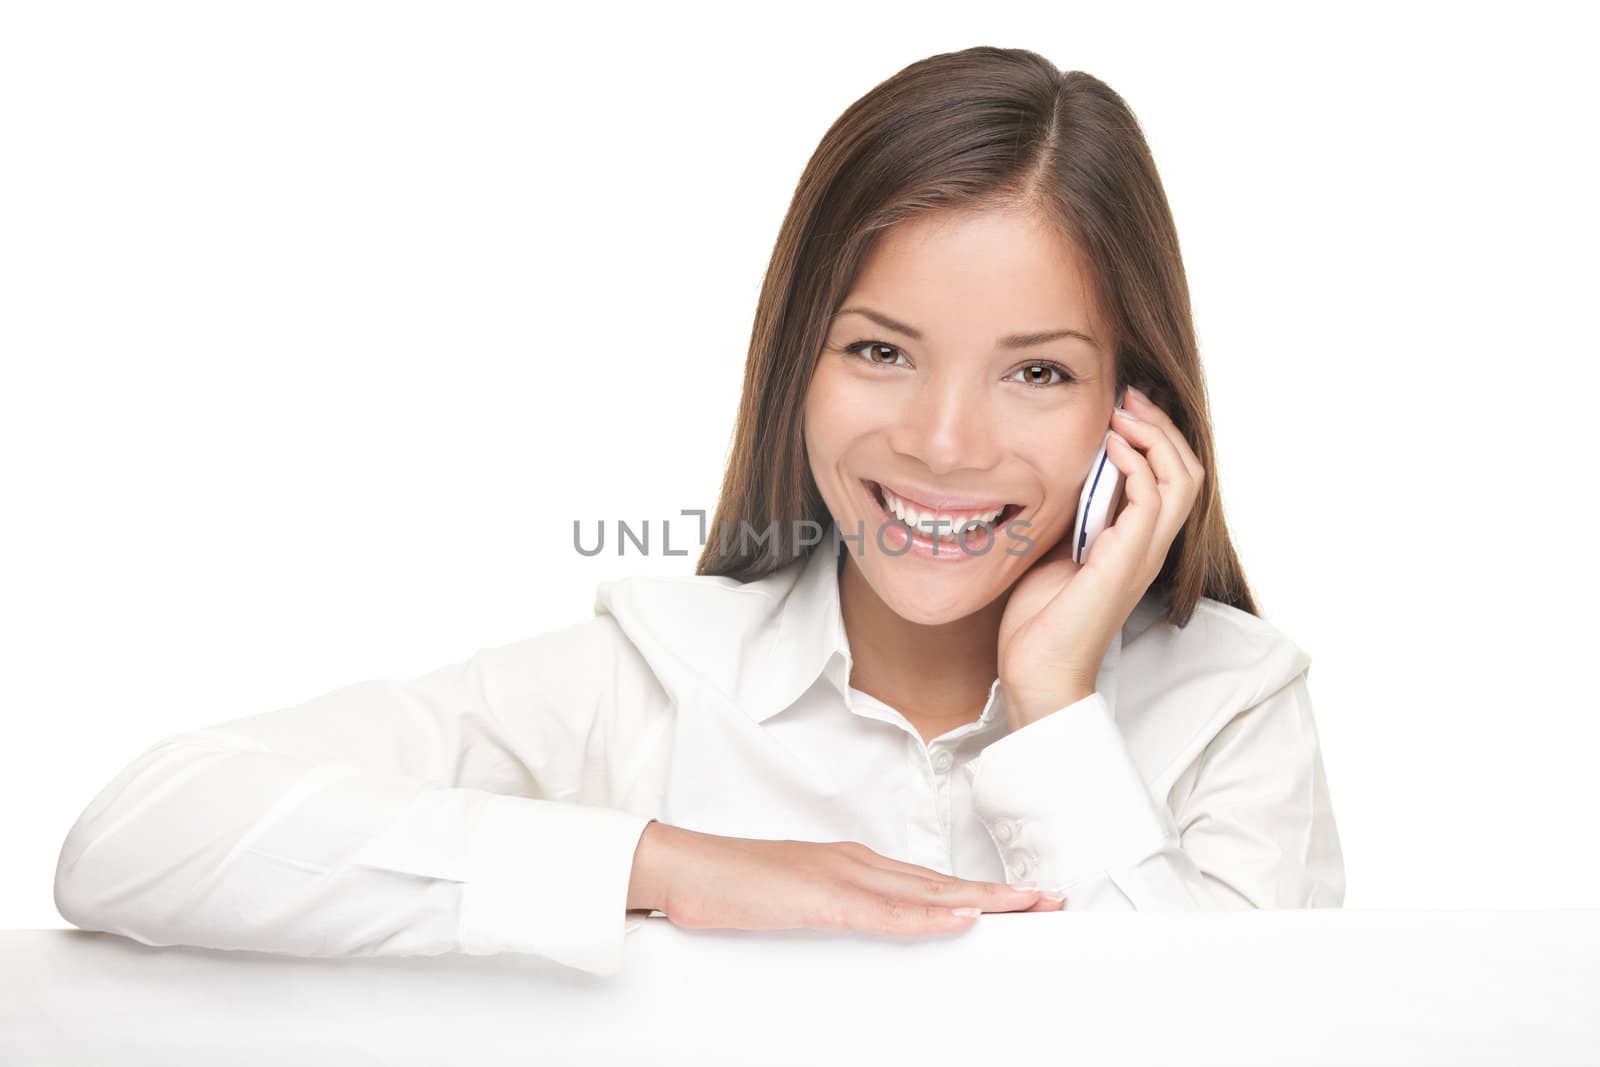 Woman showing billboard sign while talking on mobile phone and smiling. Young beautiful woman standing behind blank white billboard. Casual young Asian / Caucasian female model with very friendly relaxed smile. Isolated on white background 